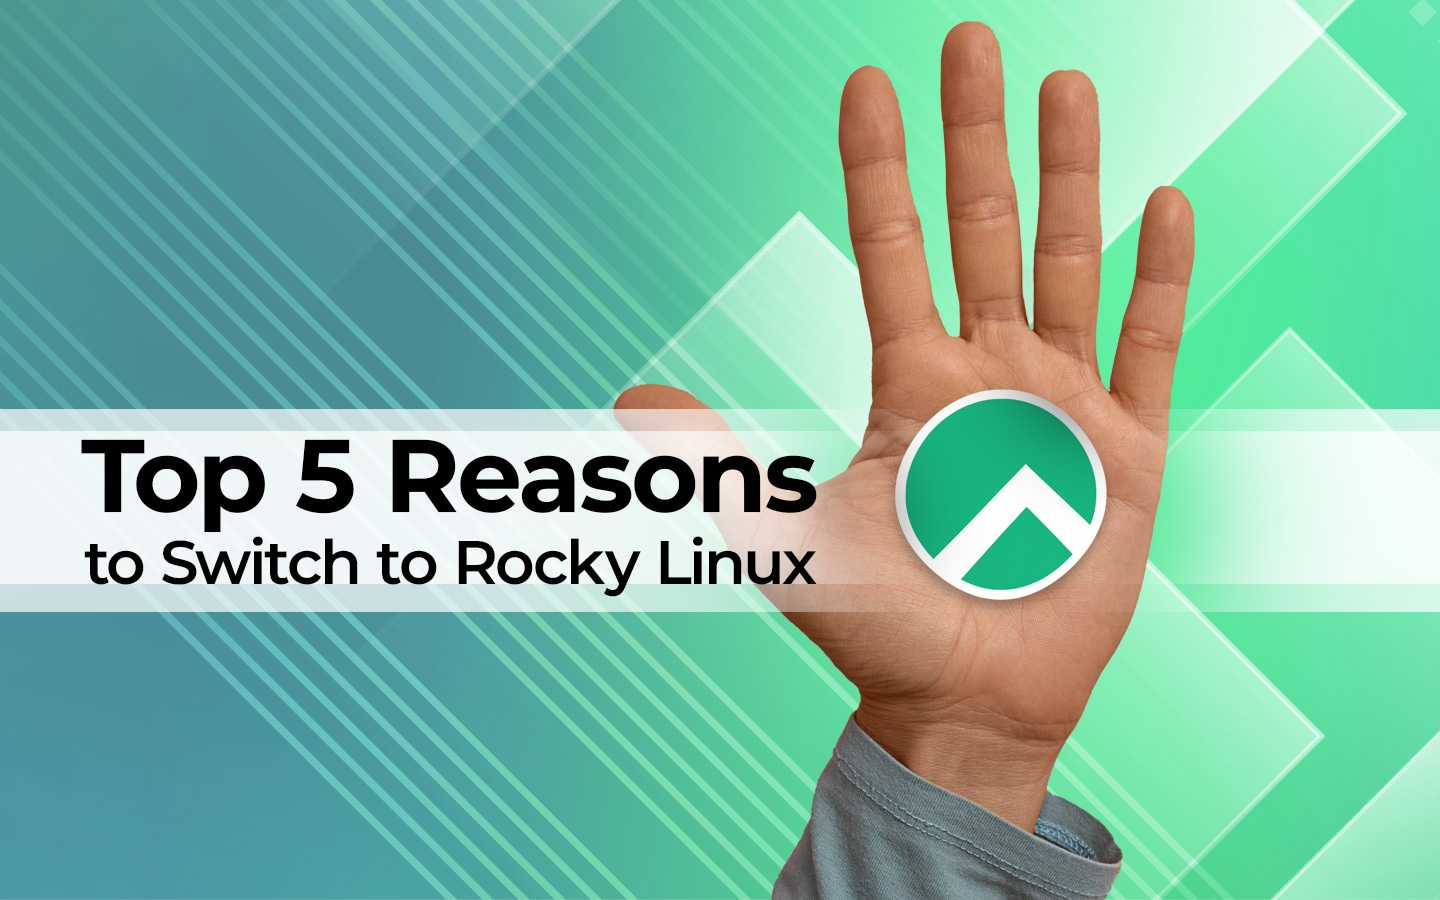 Top 5 Reasons to Switch to Rocky Linux